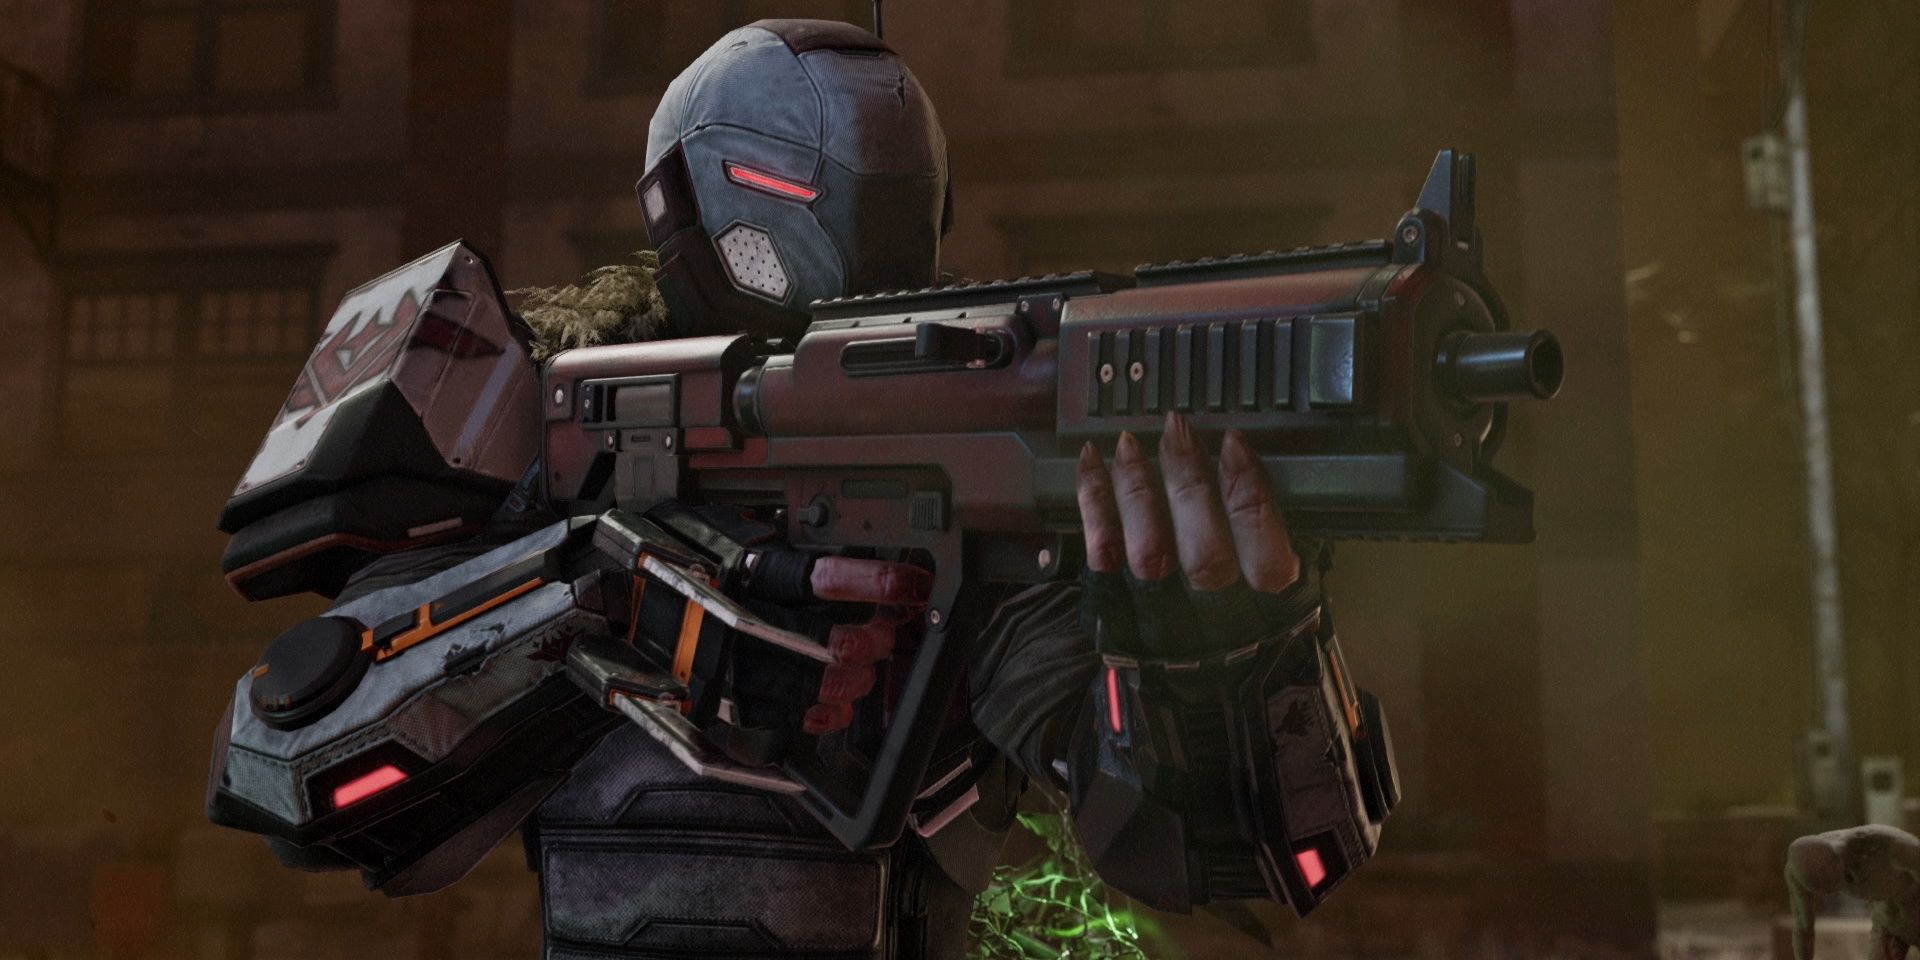 A Skirmisher prepares to fire in XCOM2: War of the Chosen